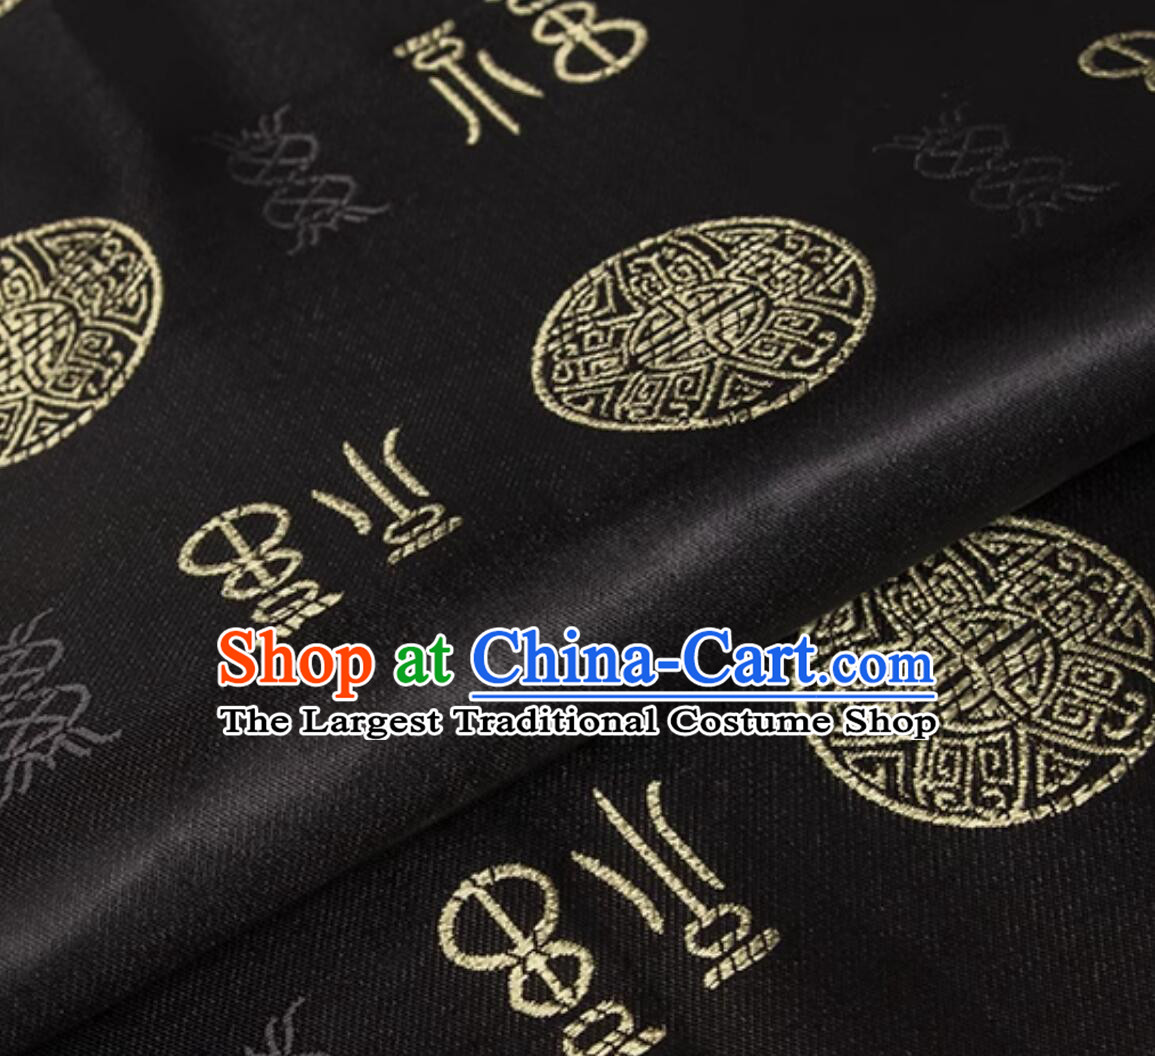 Chinese Traditional Lucky Pattern Design Black Brocade Oriental Material Royal Palace Style Fabric